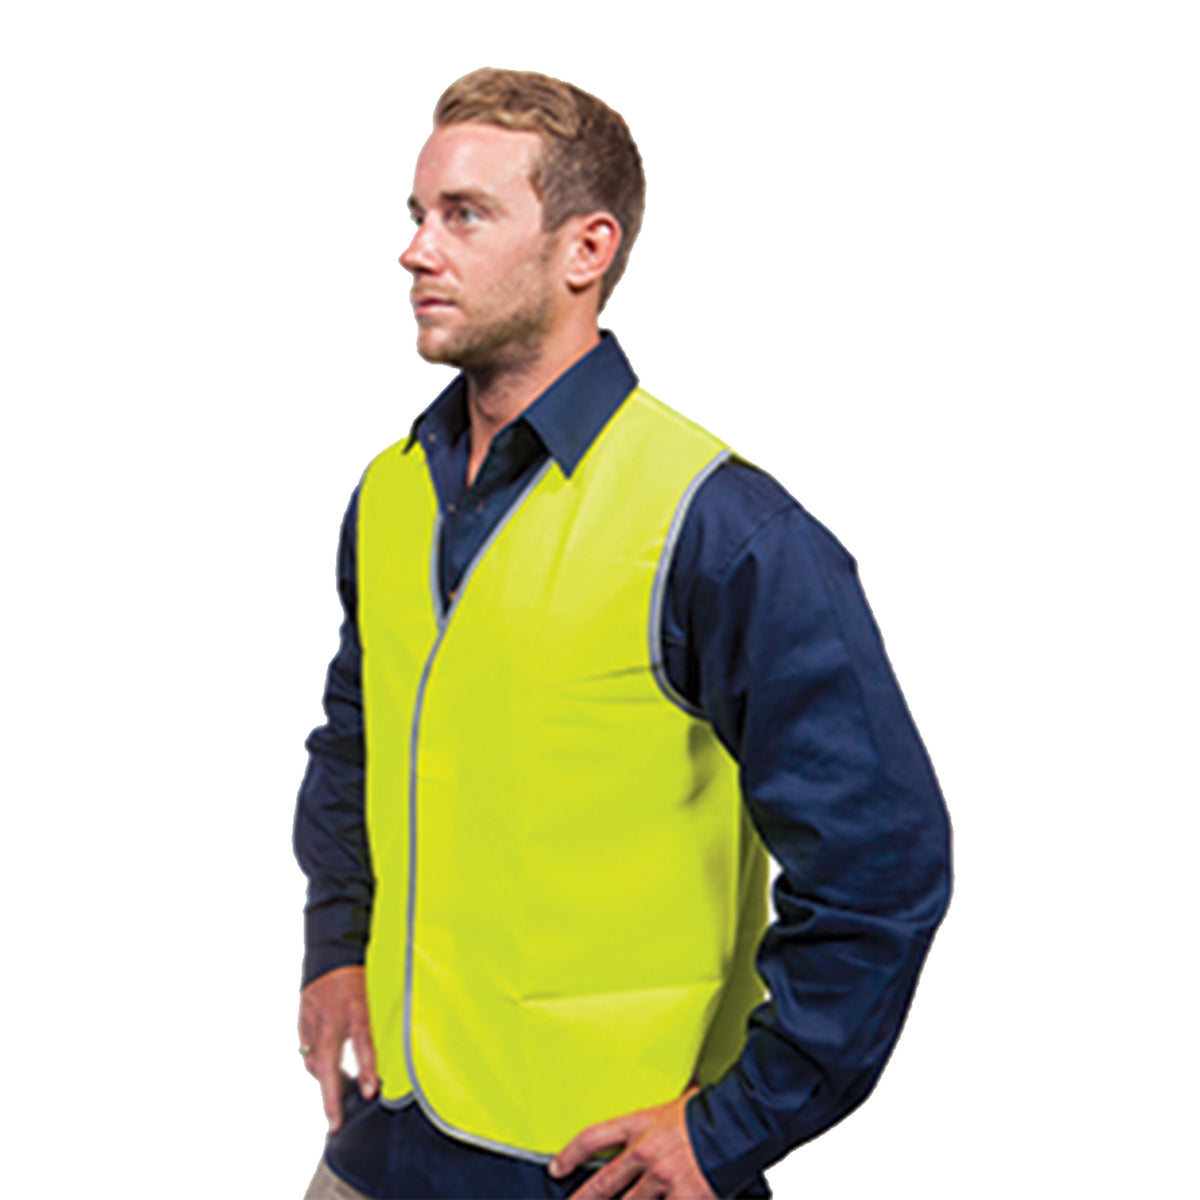 safety vest in yellow